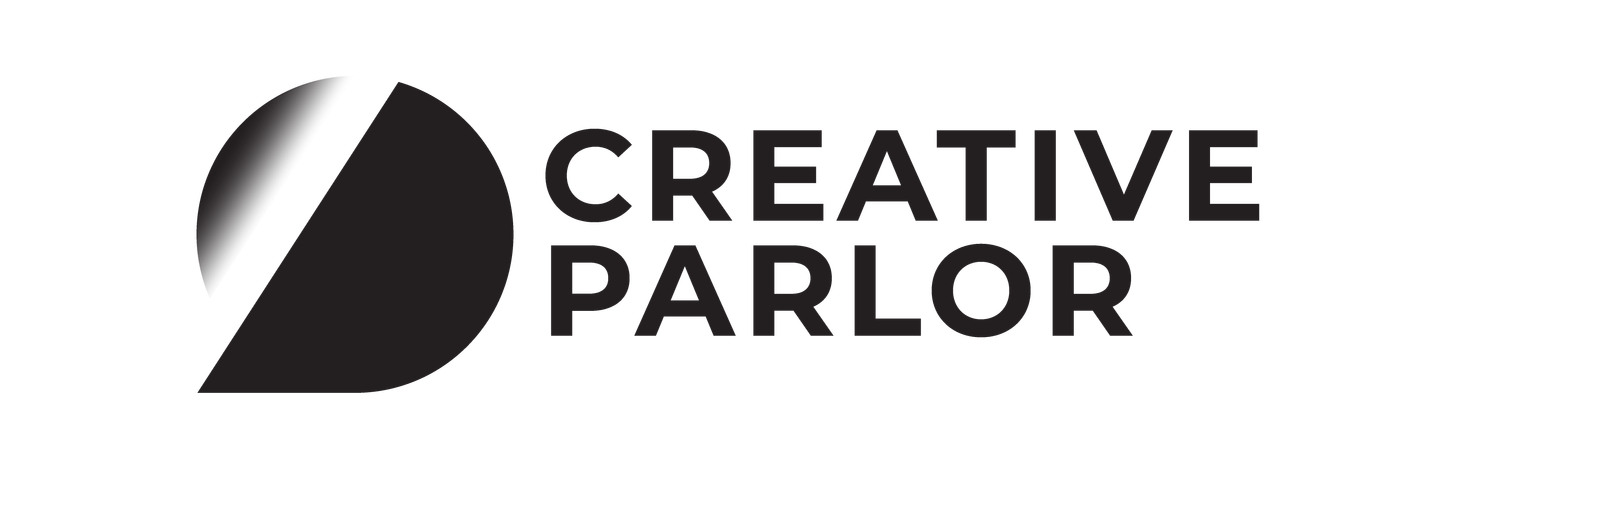 The Creative Parlor